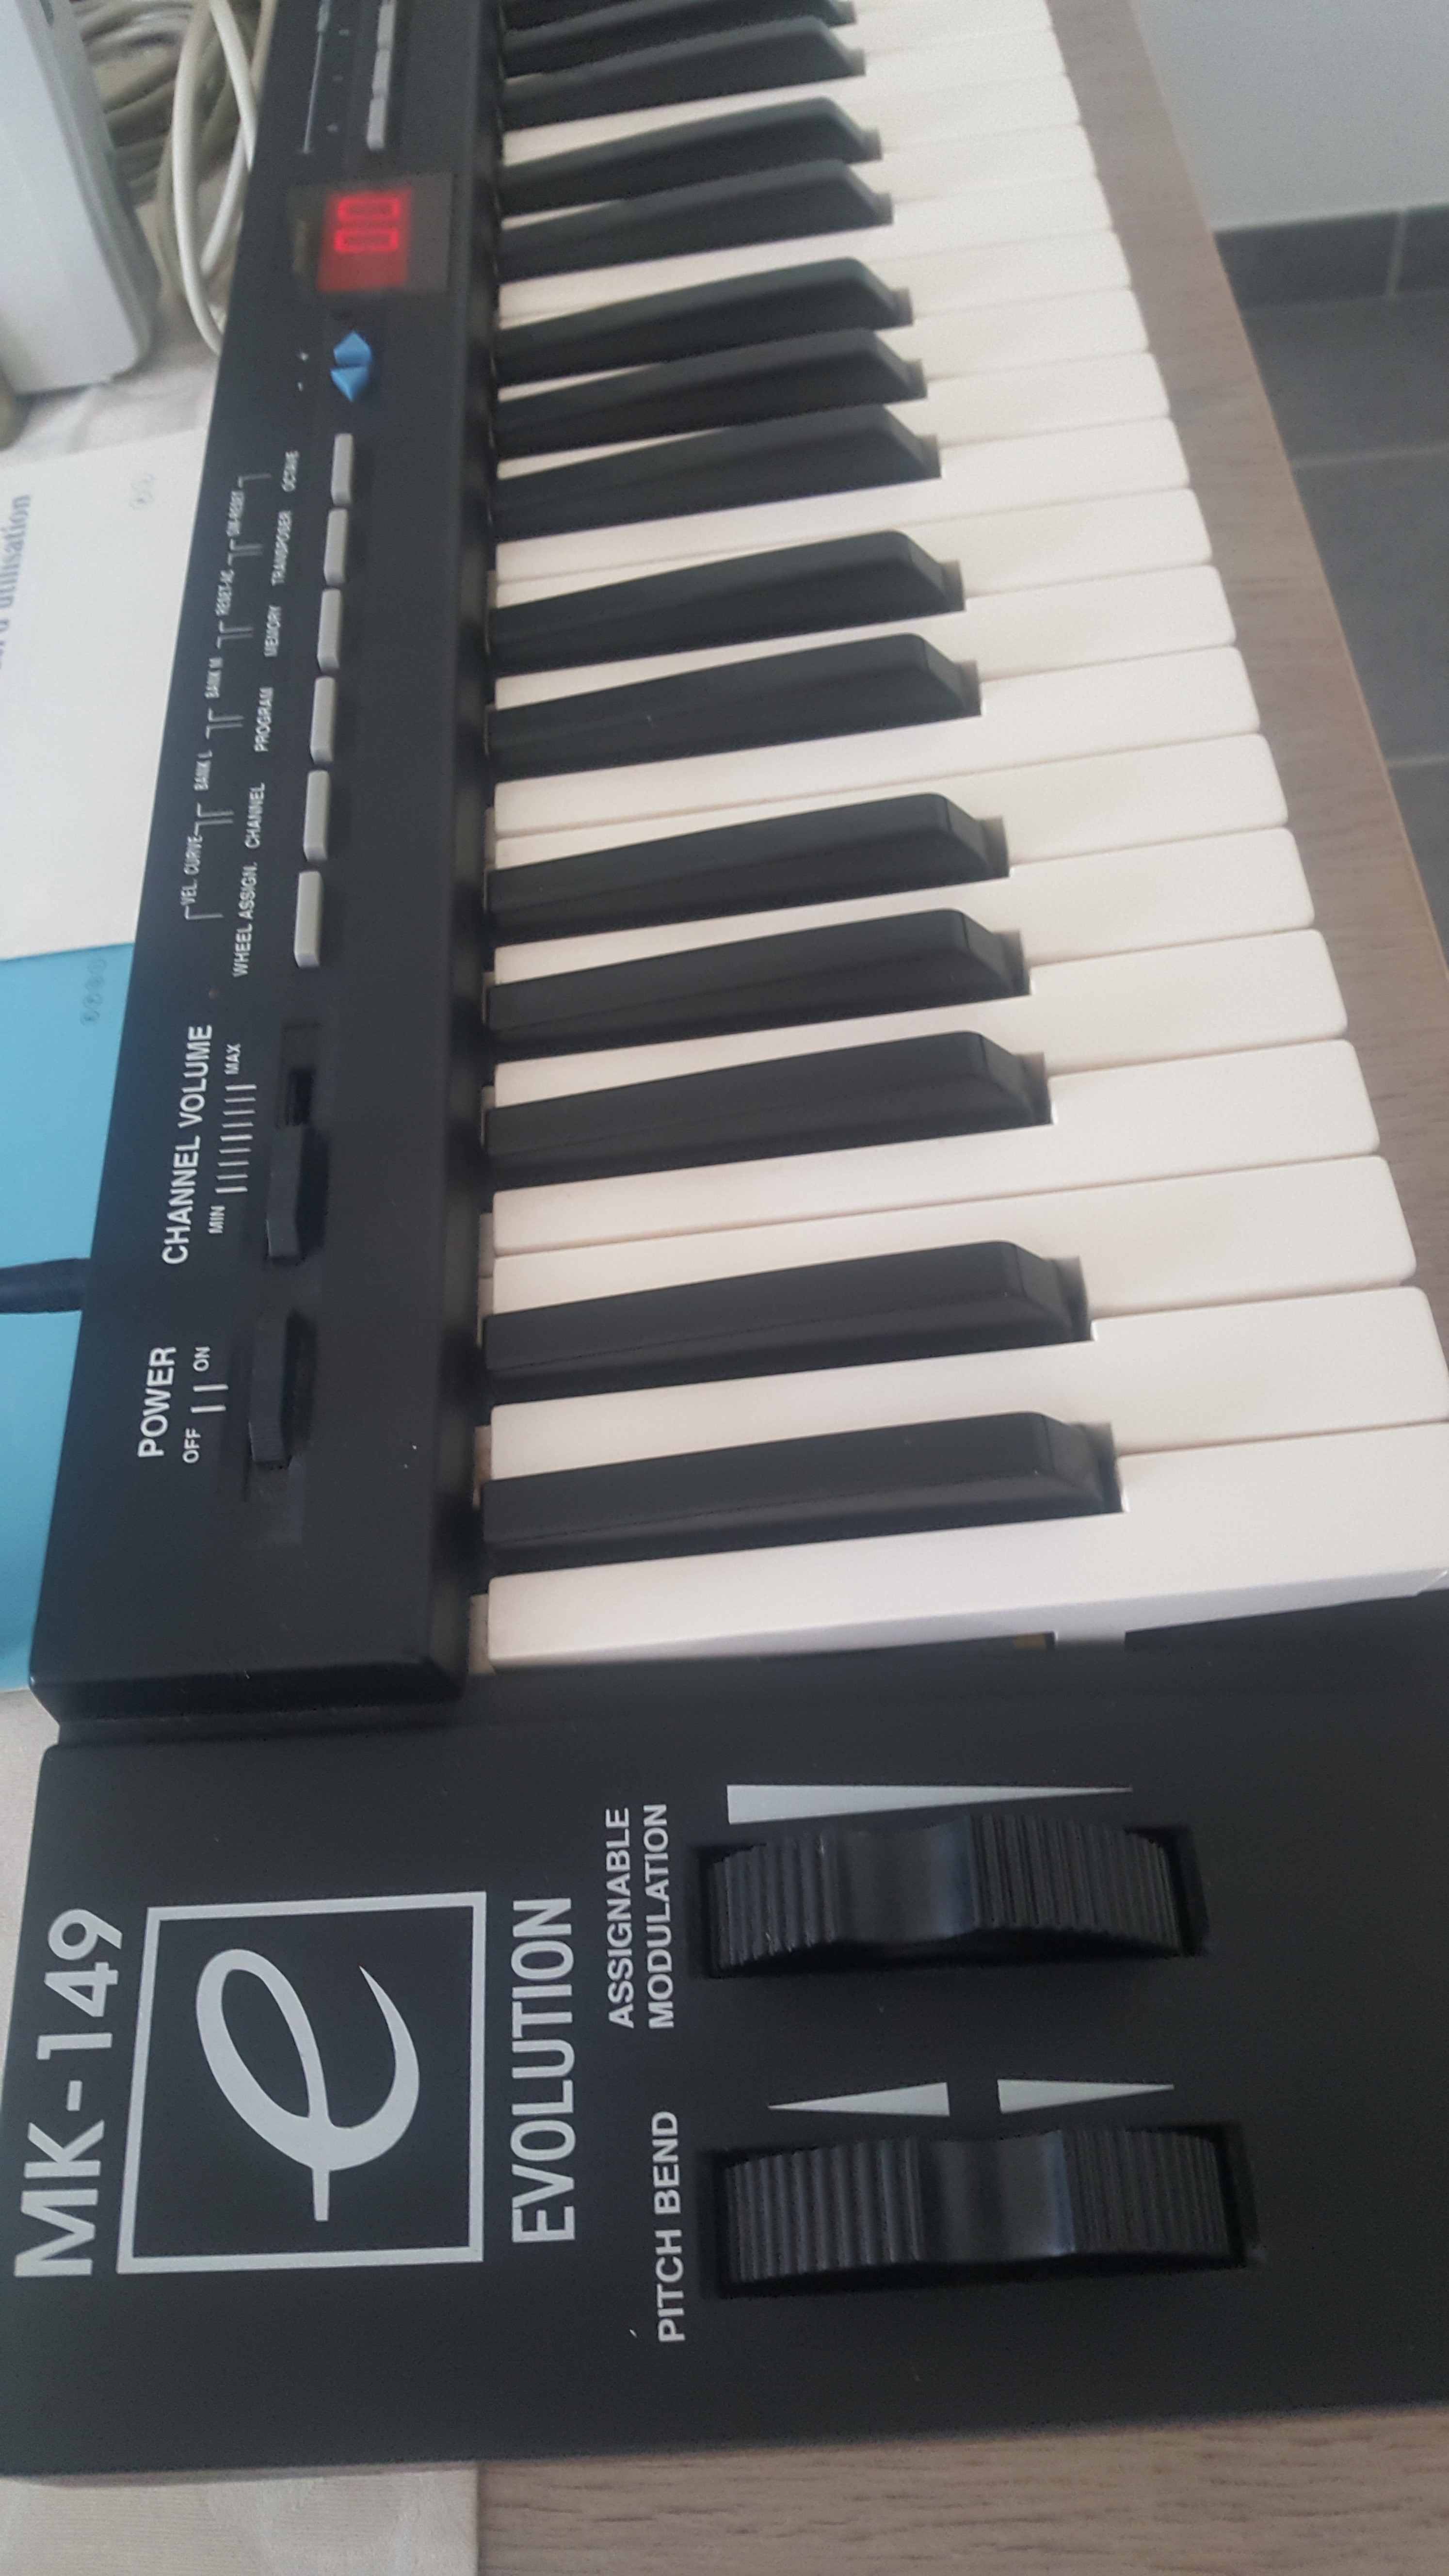 yamaha dsp factory ds2416 drivers